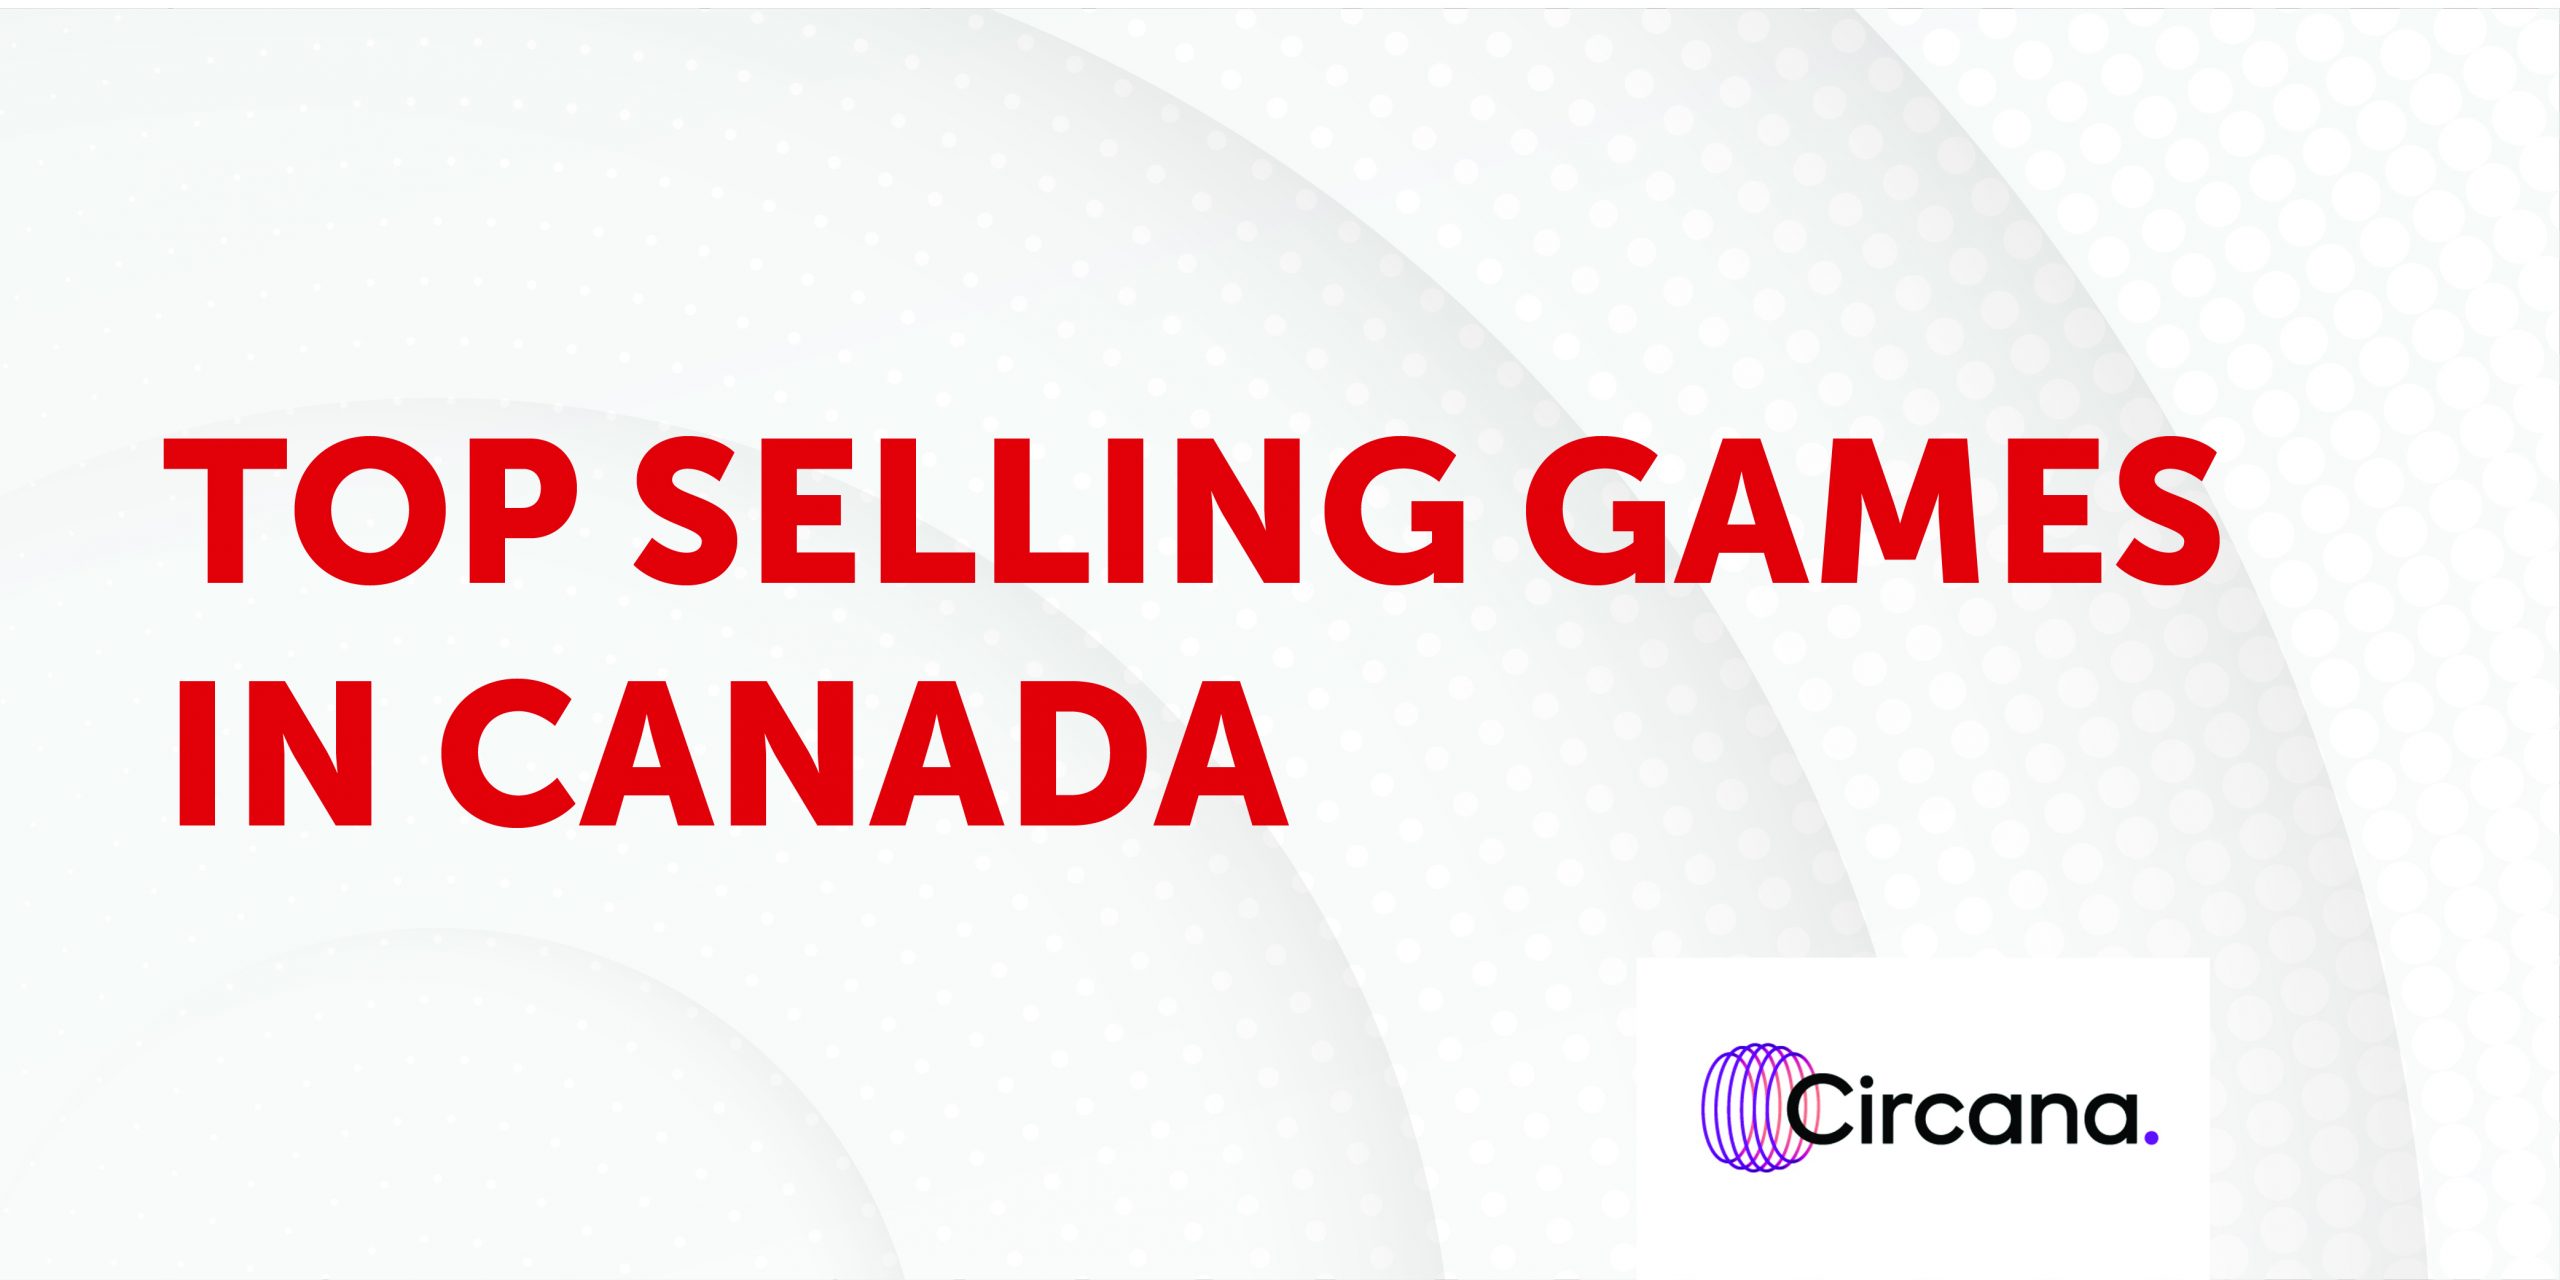 Top Selling Games in Canada